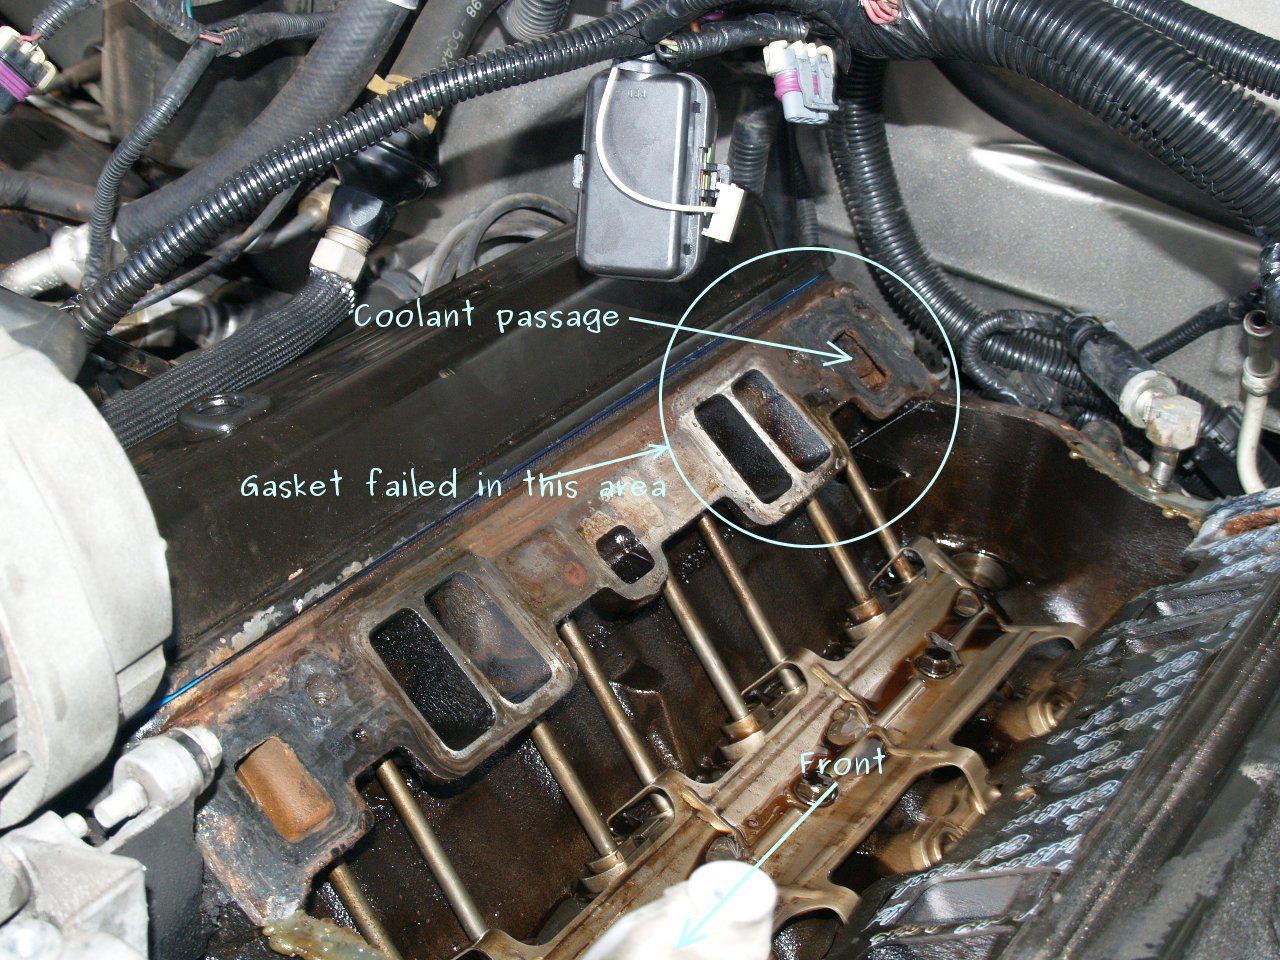 See P0725 in engine